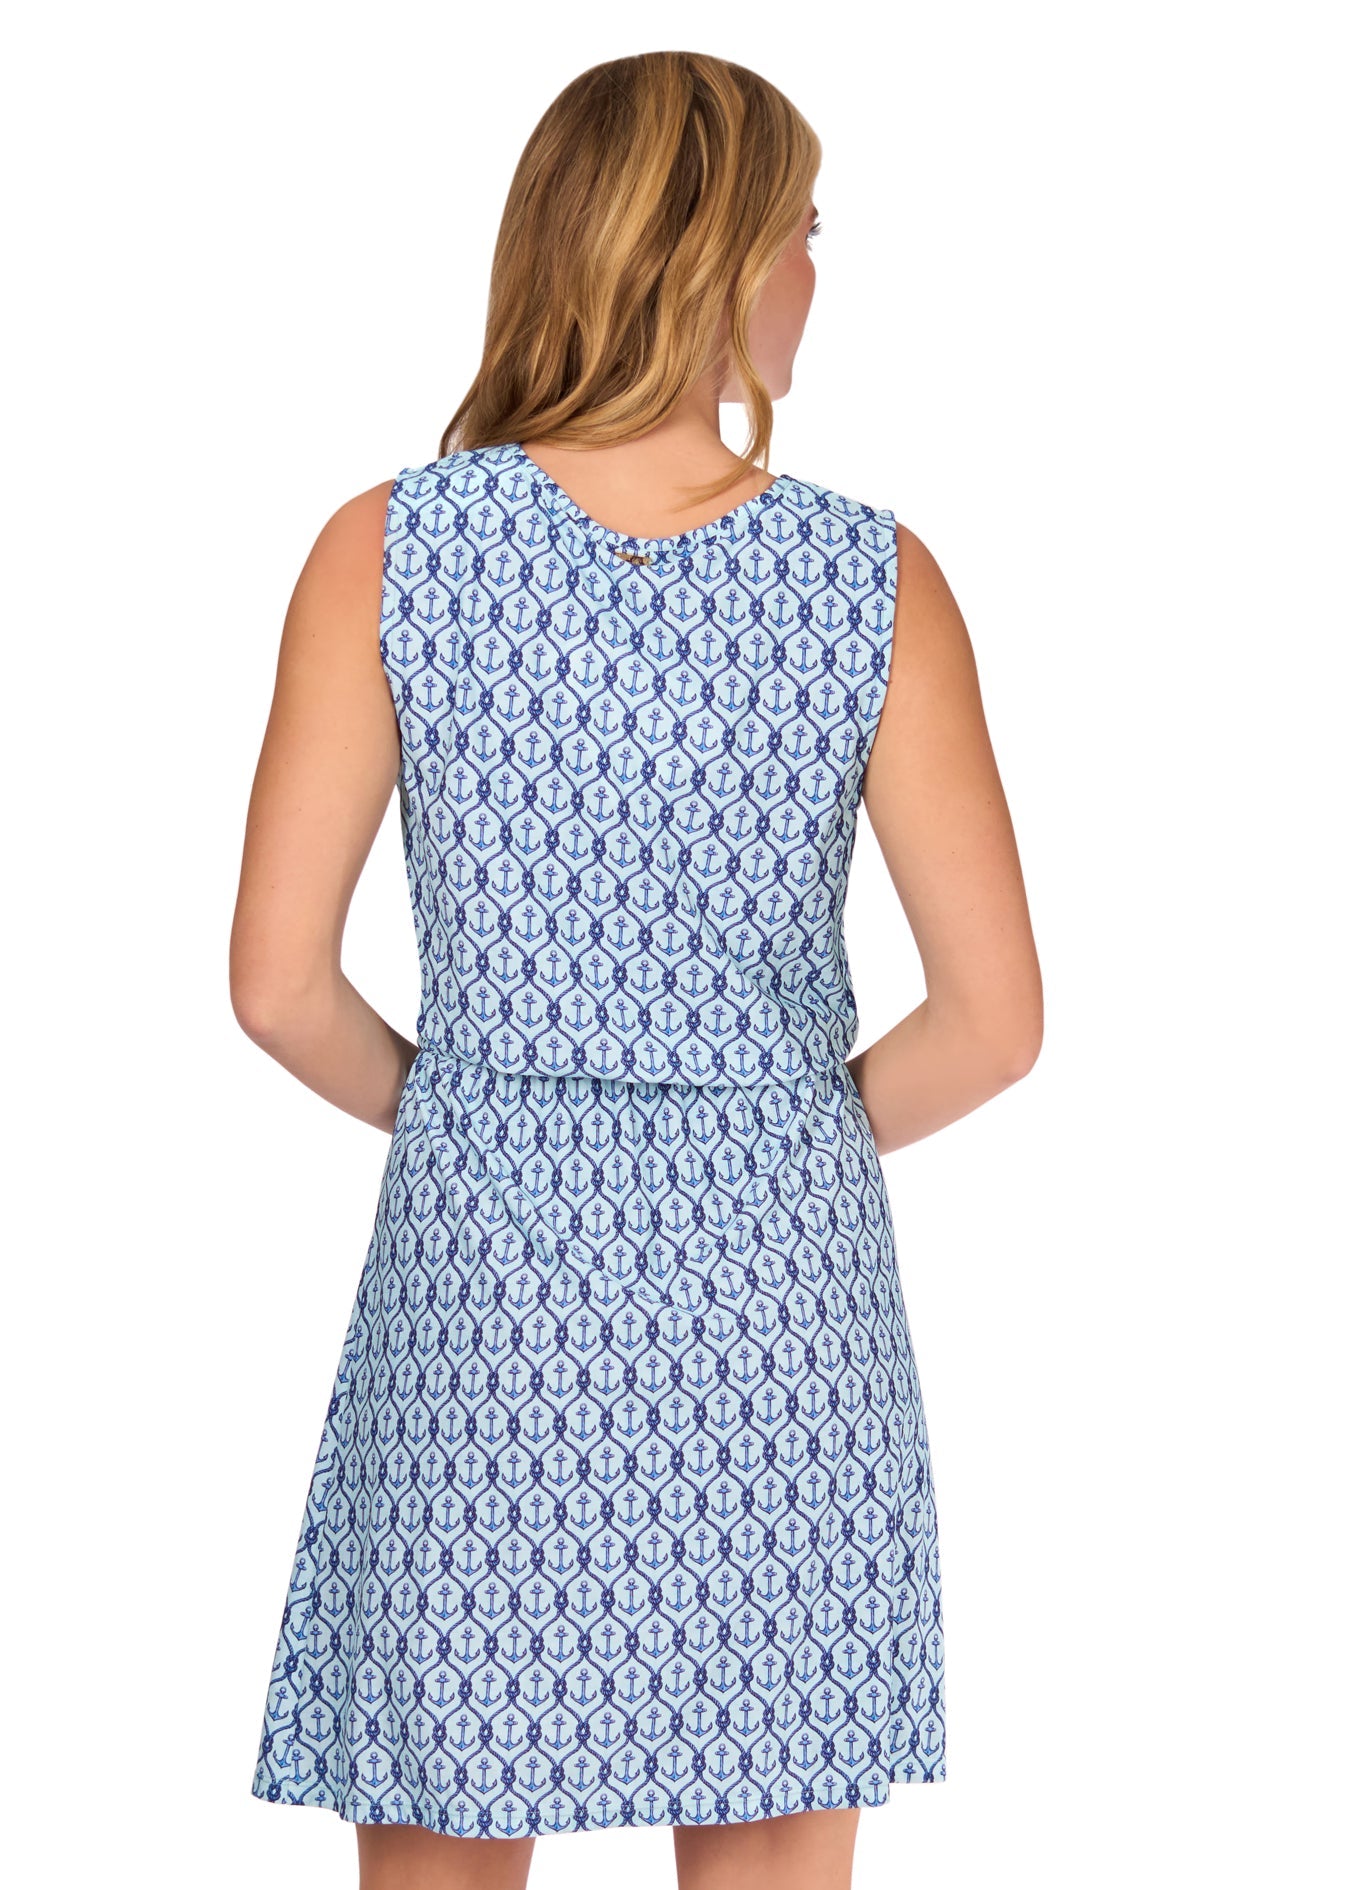 The back of a blonde woman wearing the Cabana Life sun protective Anchor Sleeveless Tie Waist Dress on a white background.